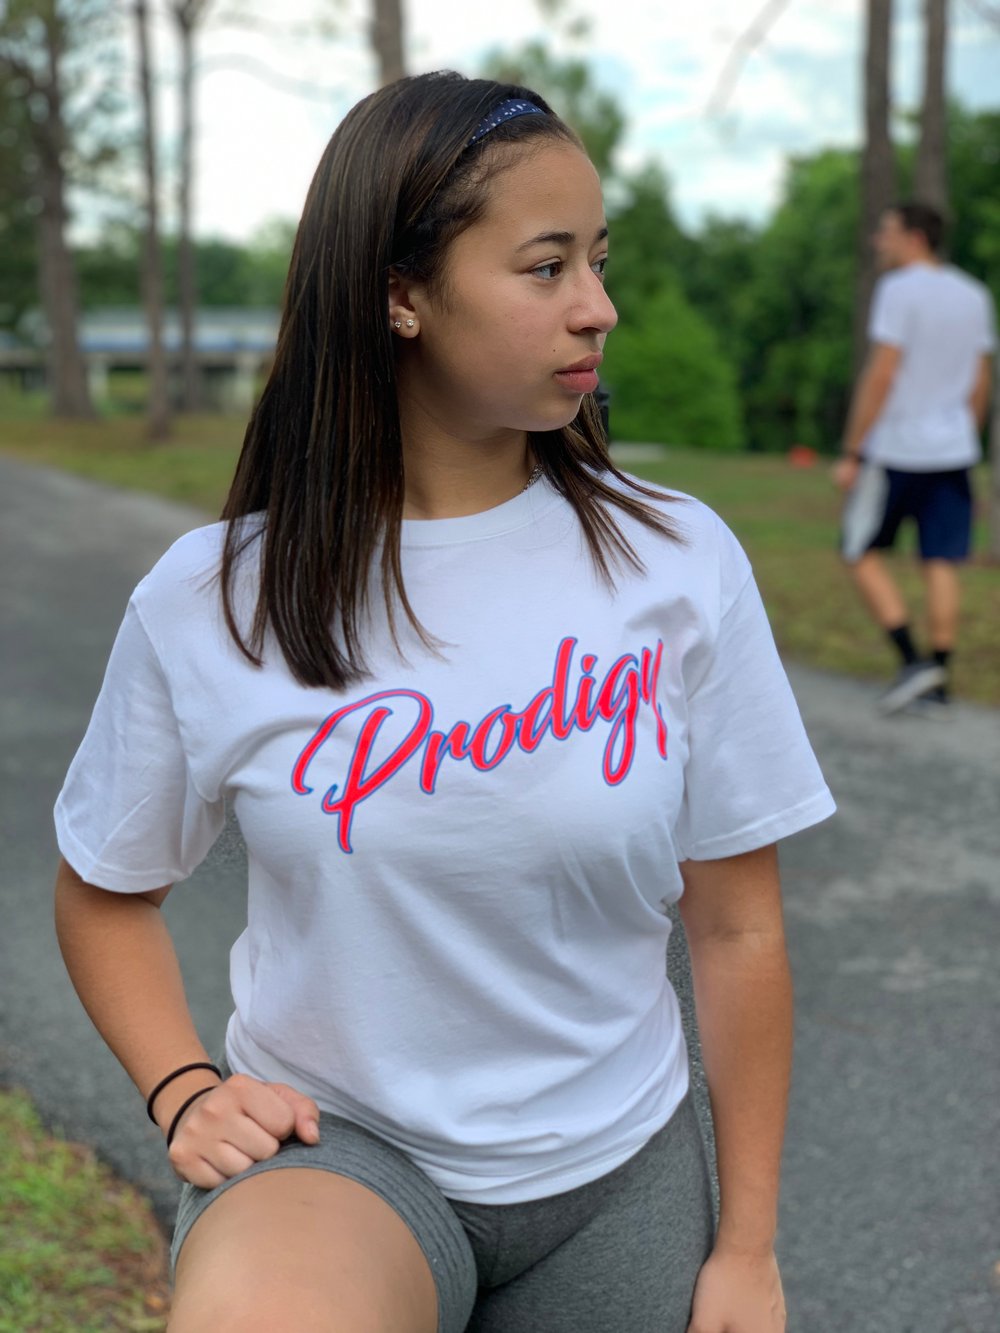 NEW PRODIGY SCRIPT MIAMI VICE WHITE T/S W/ NEON PINK AND ICE BLUE INK